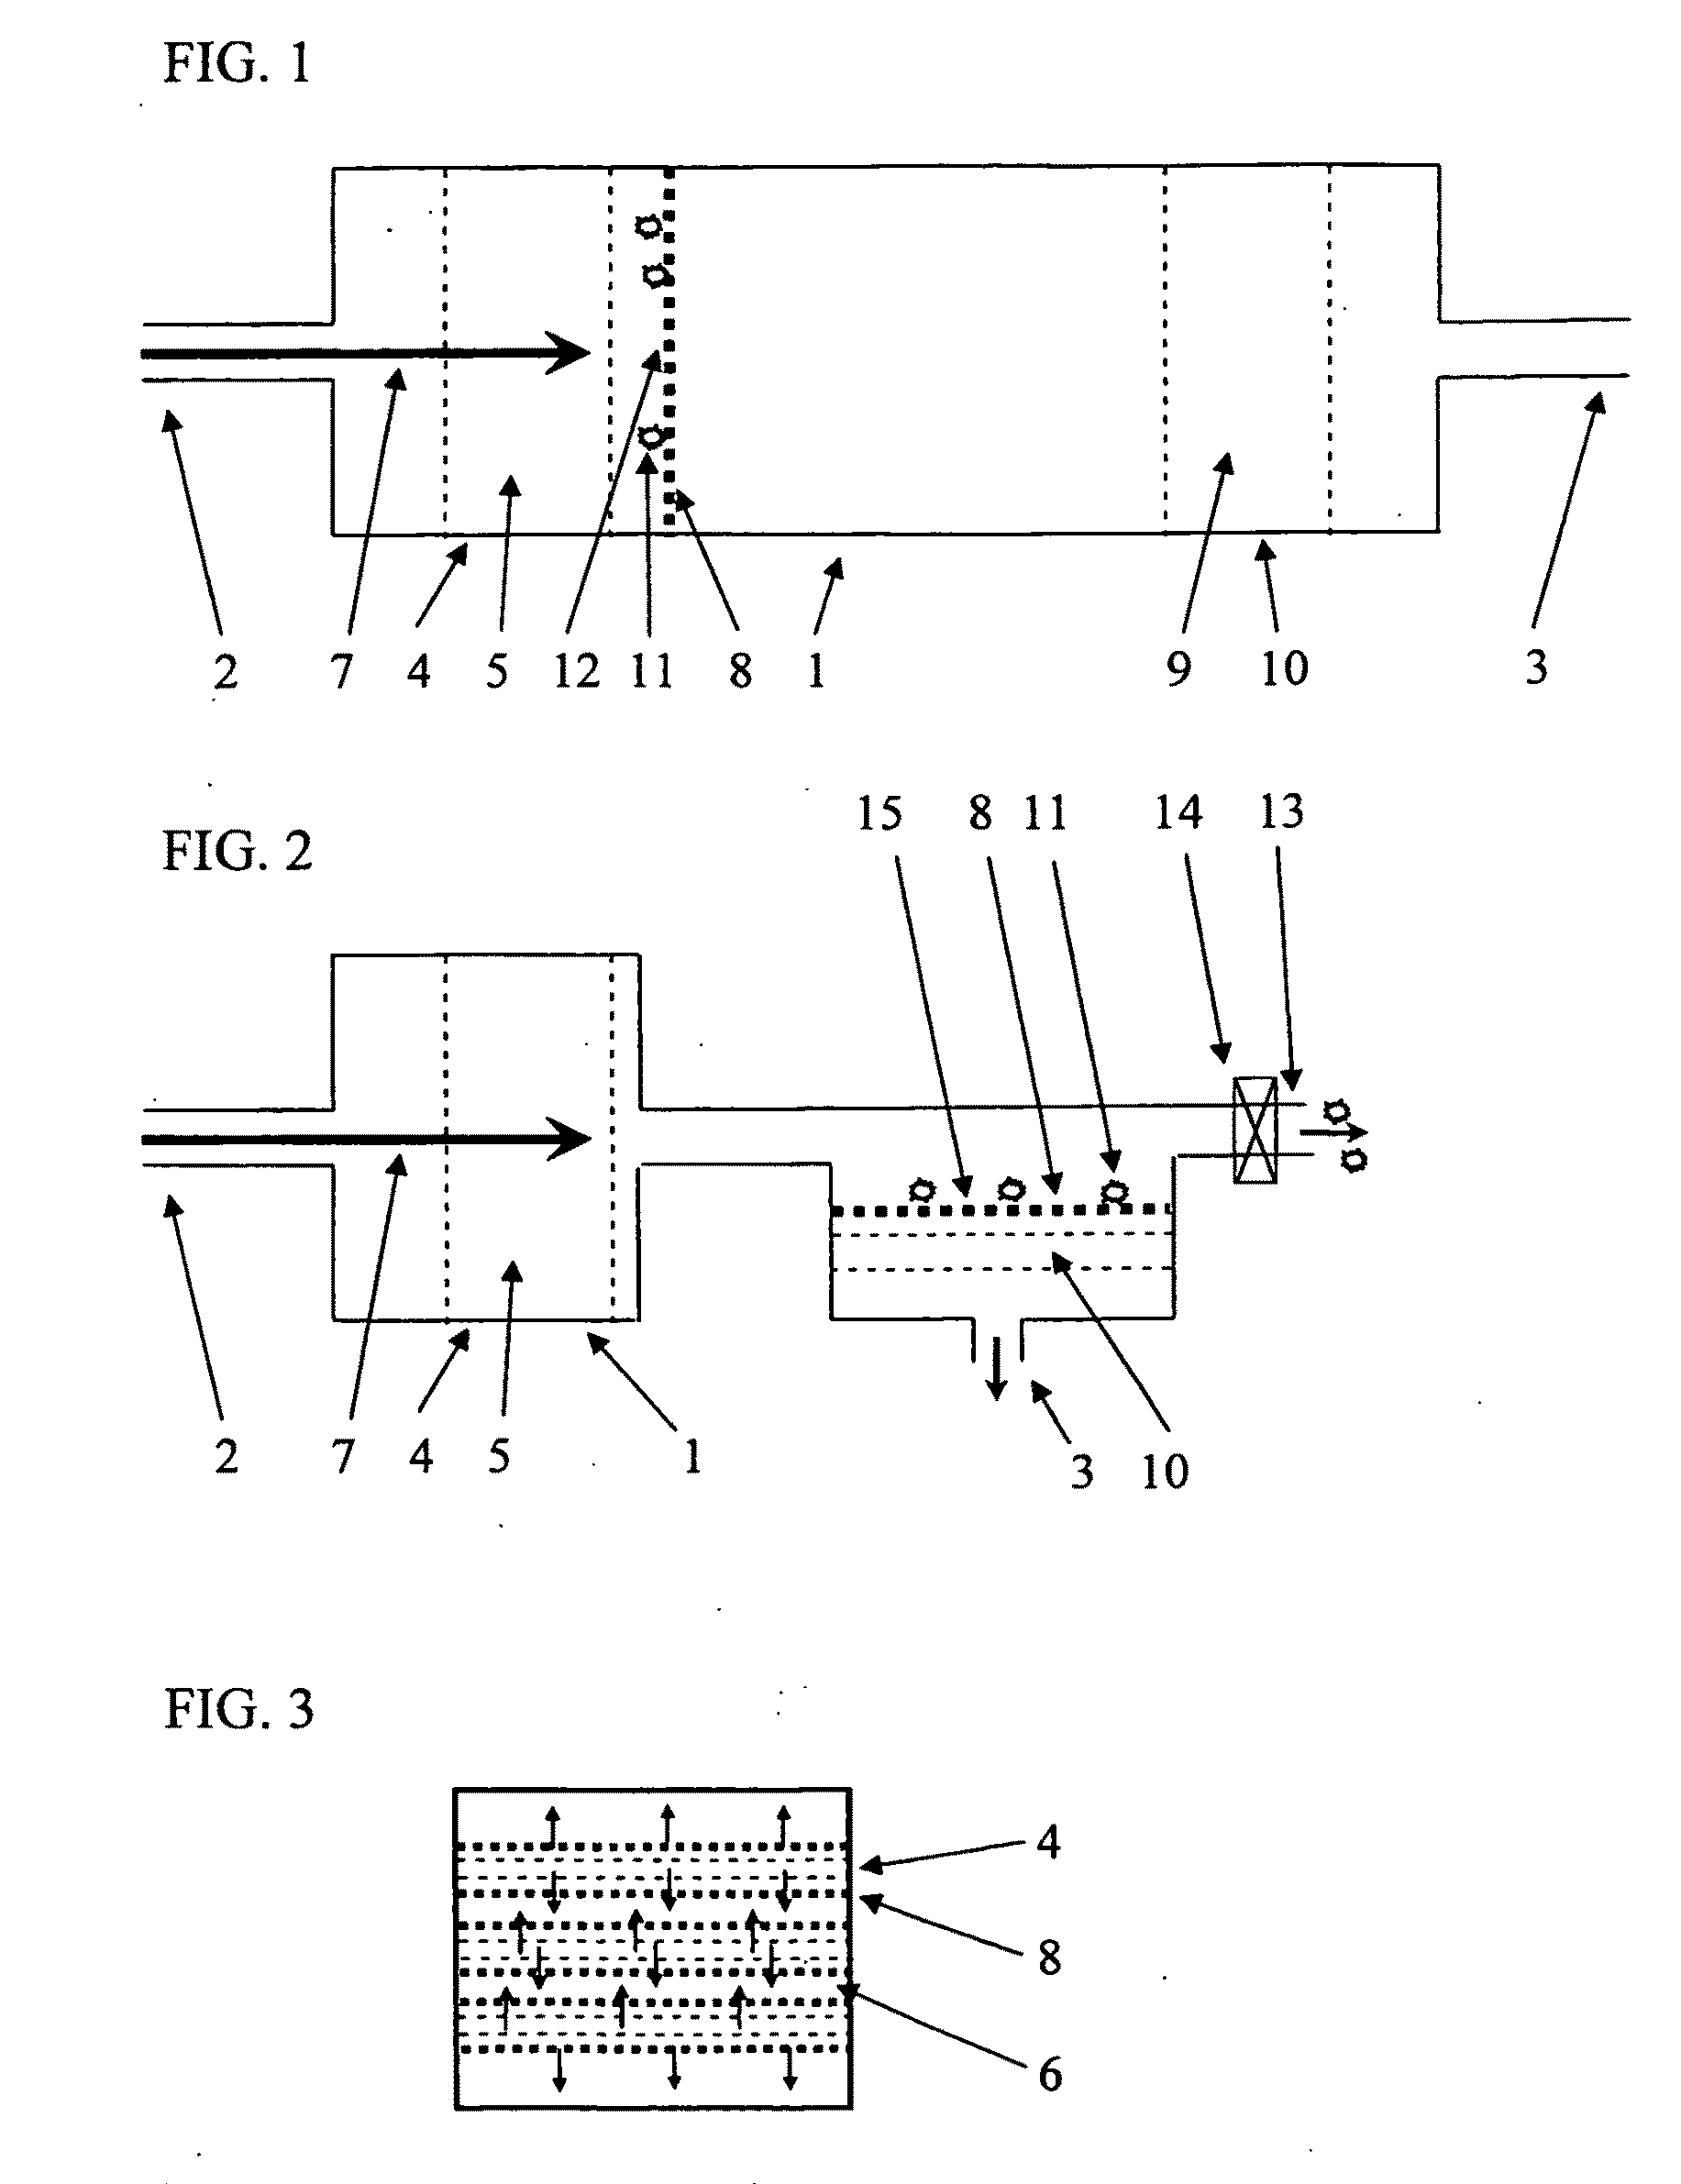 Microporous filter with a low elution antimicrobal source